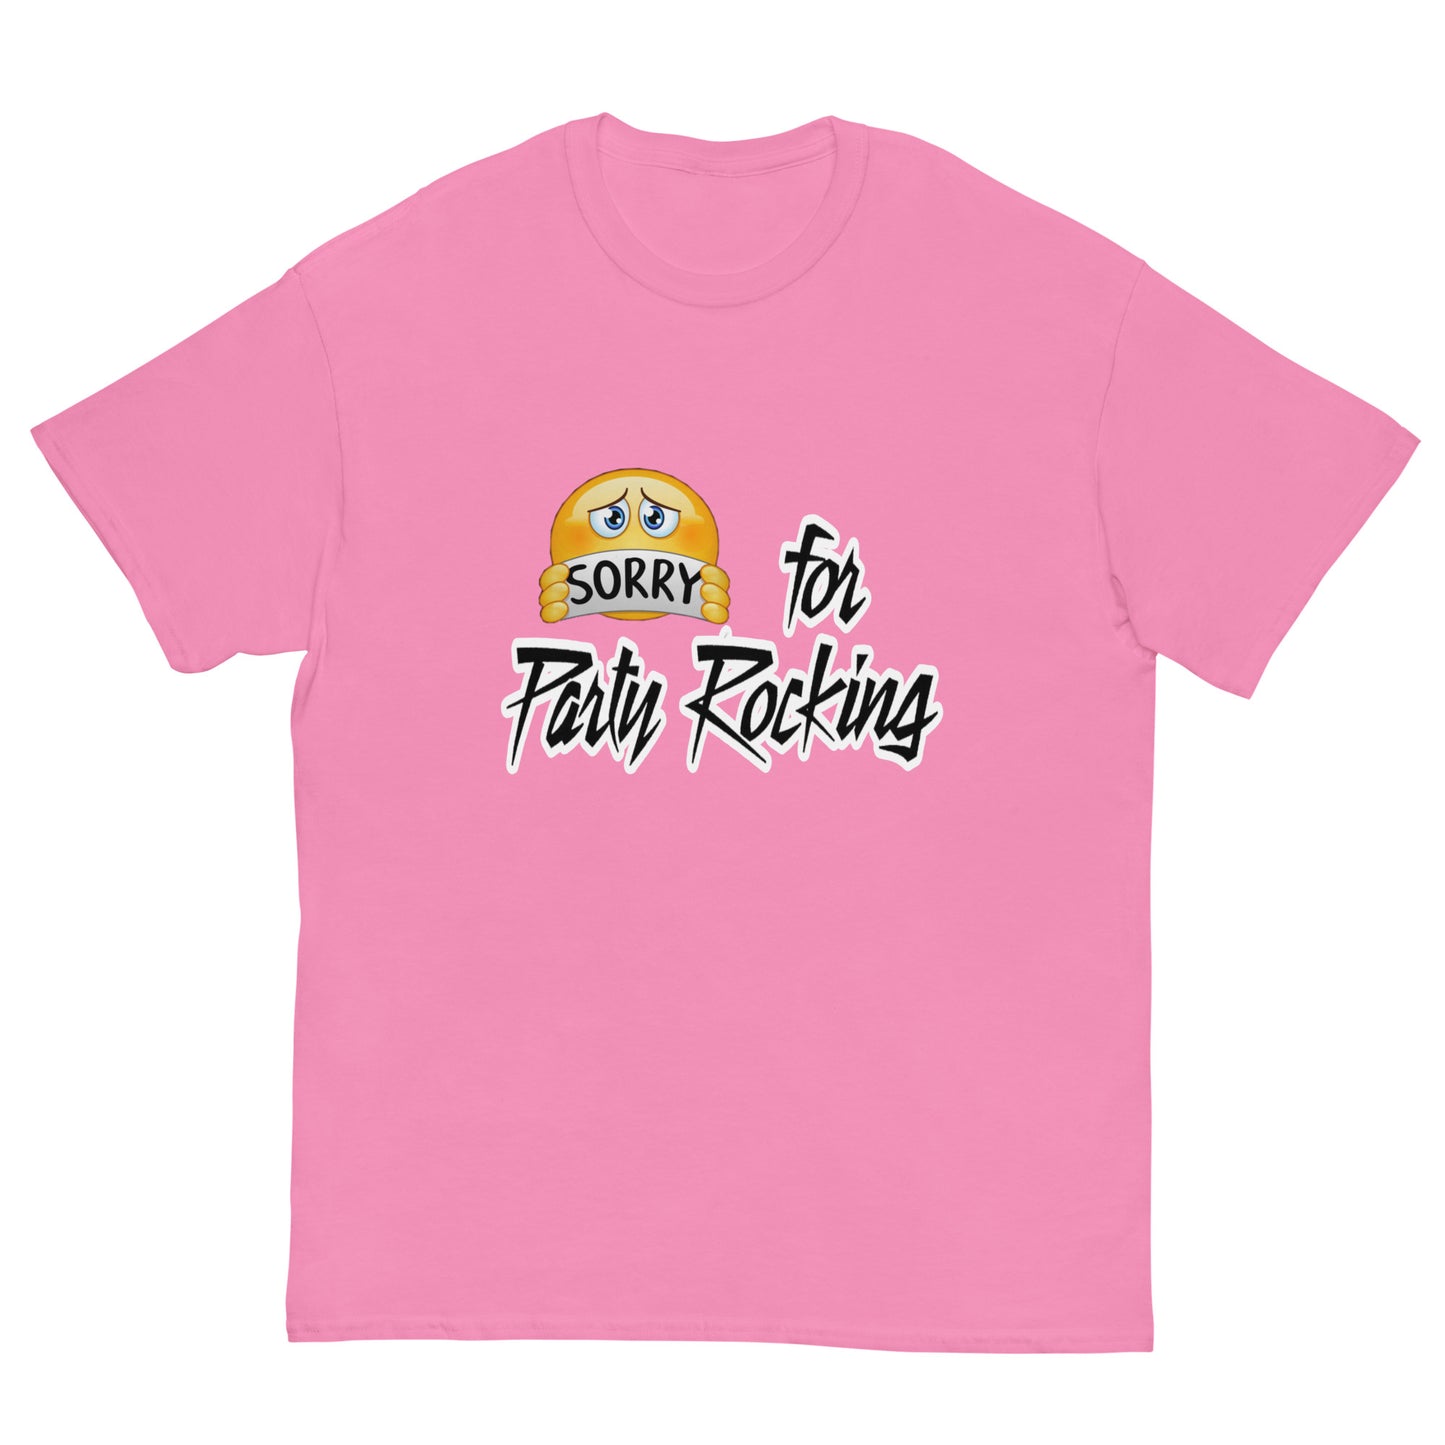 Cringey Sorry for Party Rocking Tee